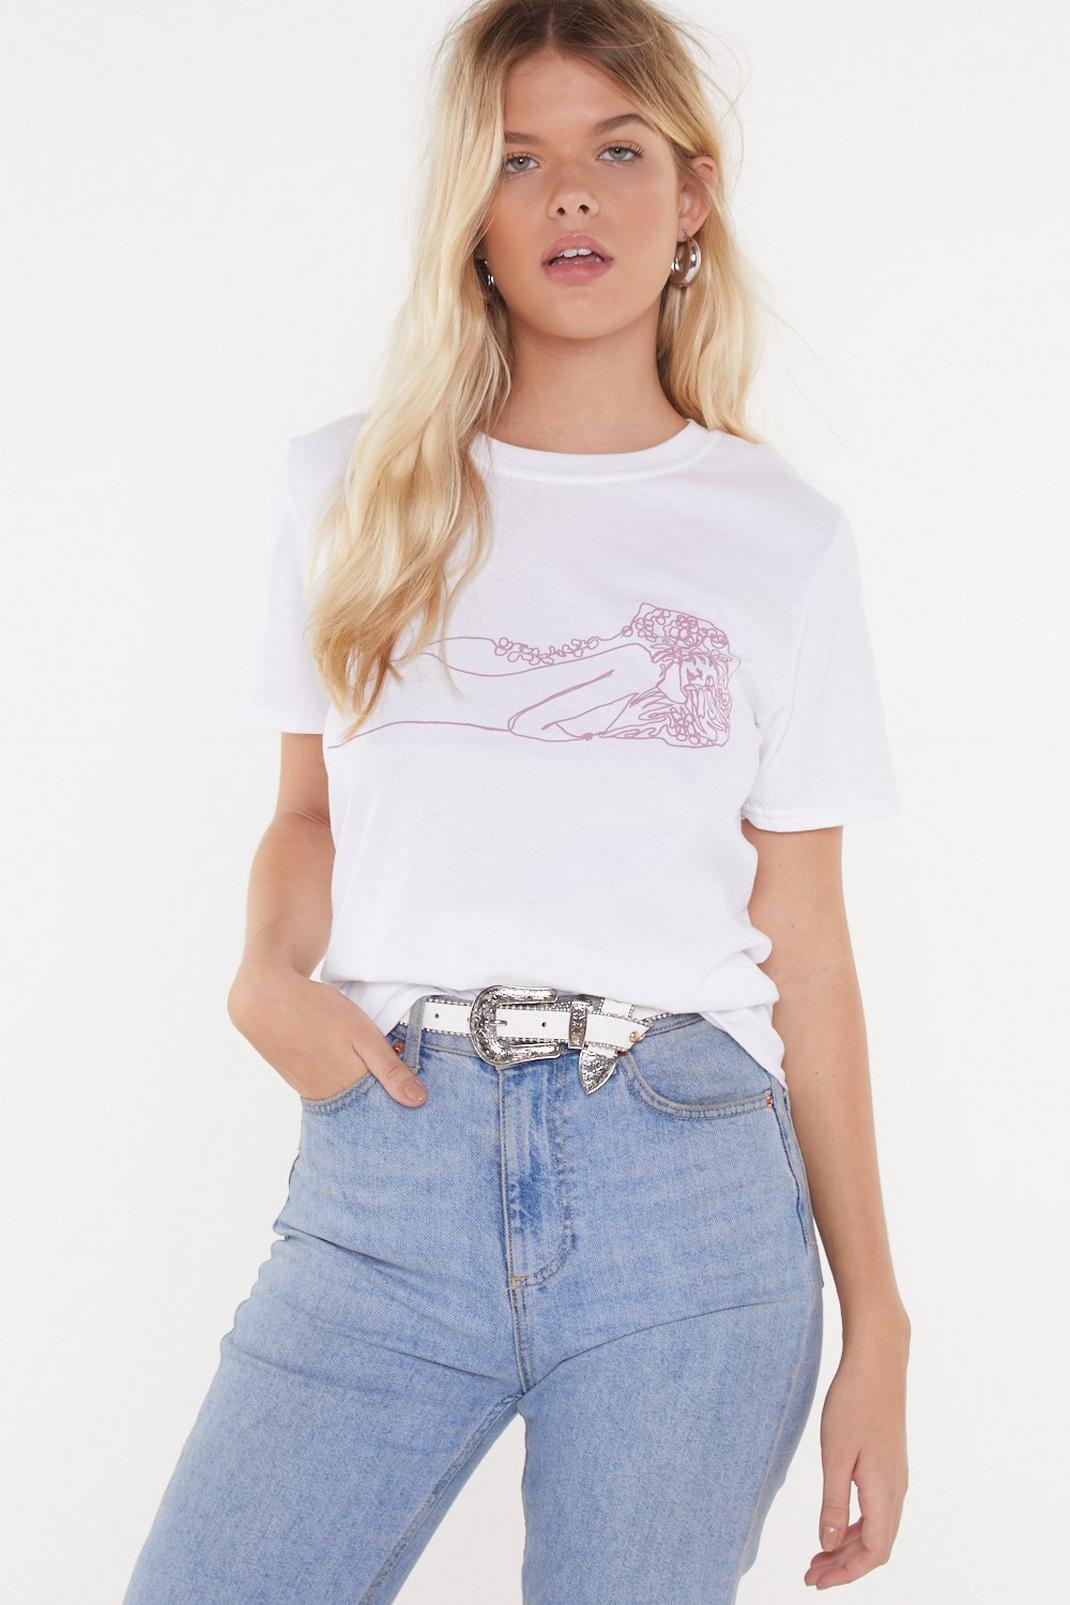 Nasty Gal x Unidays Nymph Graphic Tee image number 1